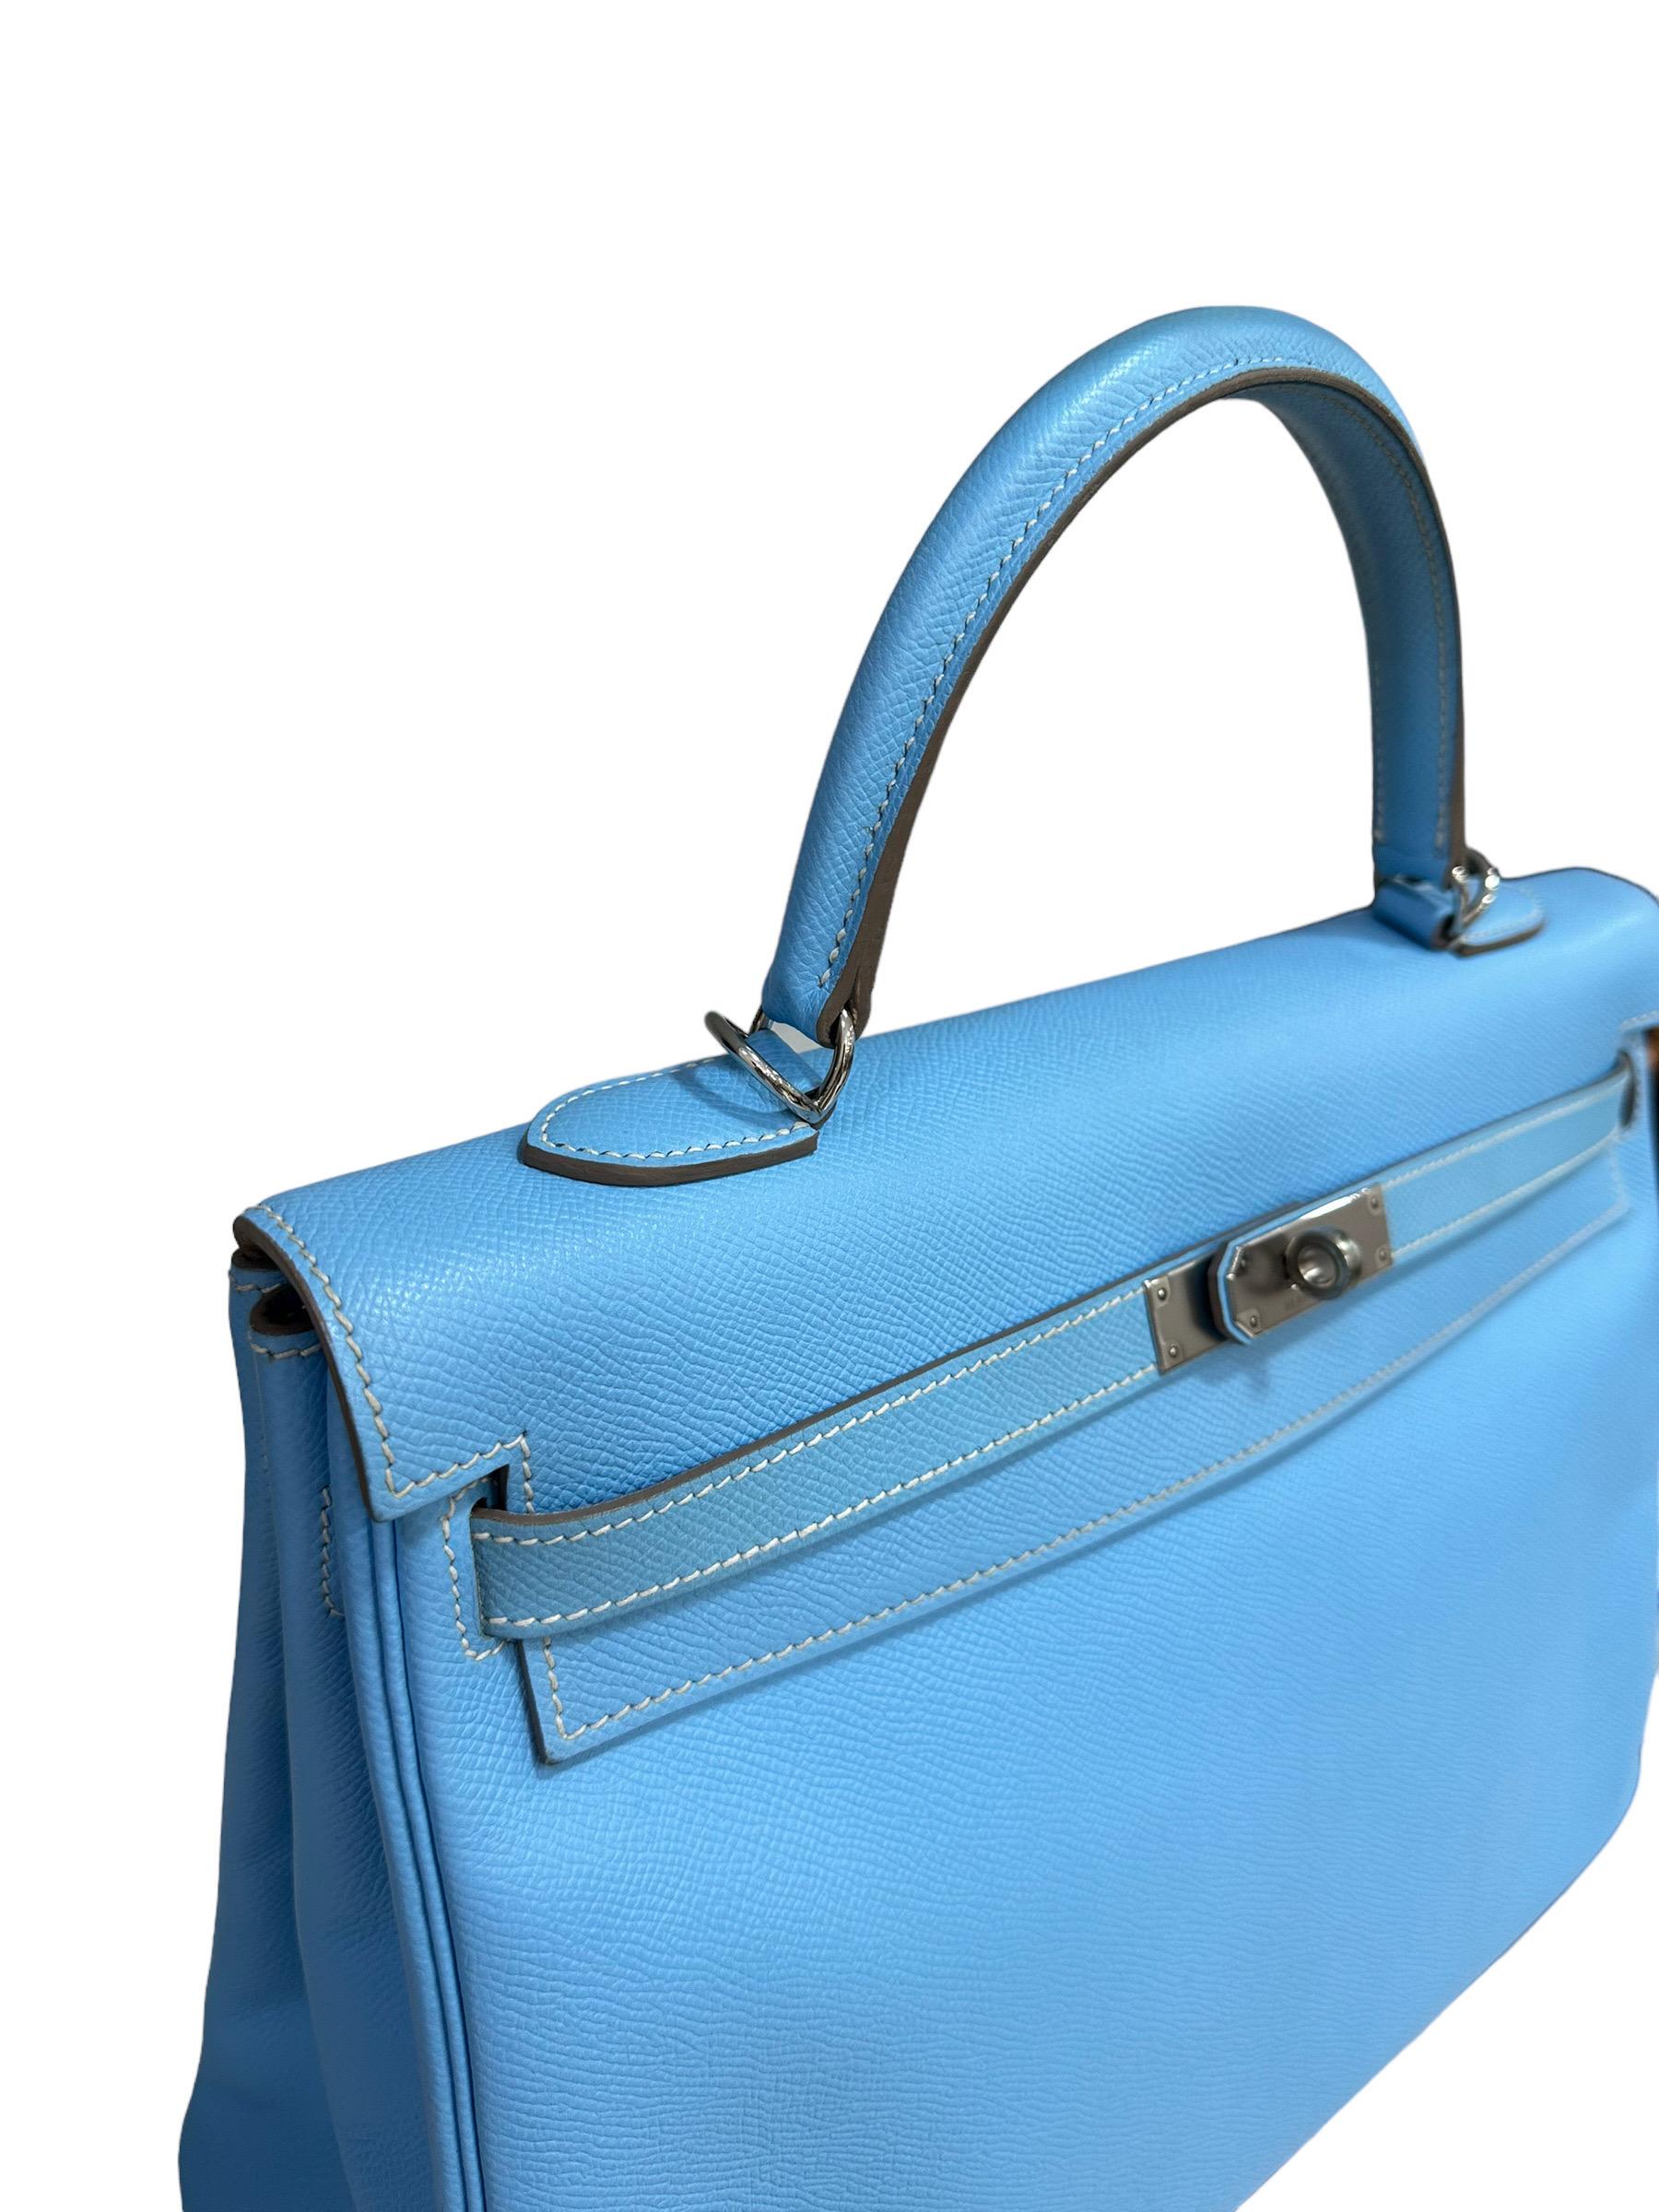 Hermès Kelly 35 Epsom Bleu Paradise 2011 In Excellent Condition For Sale In Torre Del Greco, IT